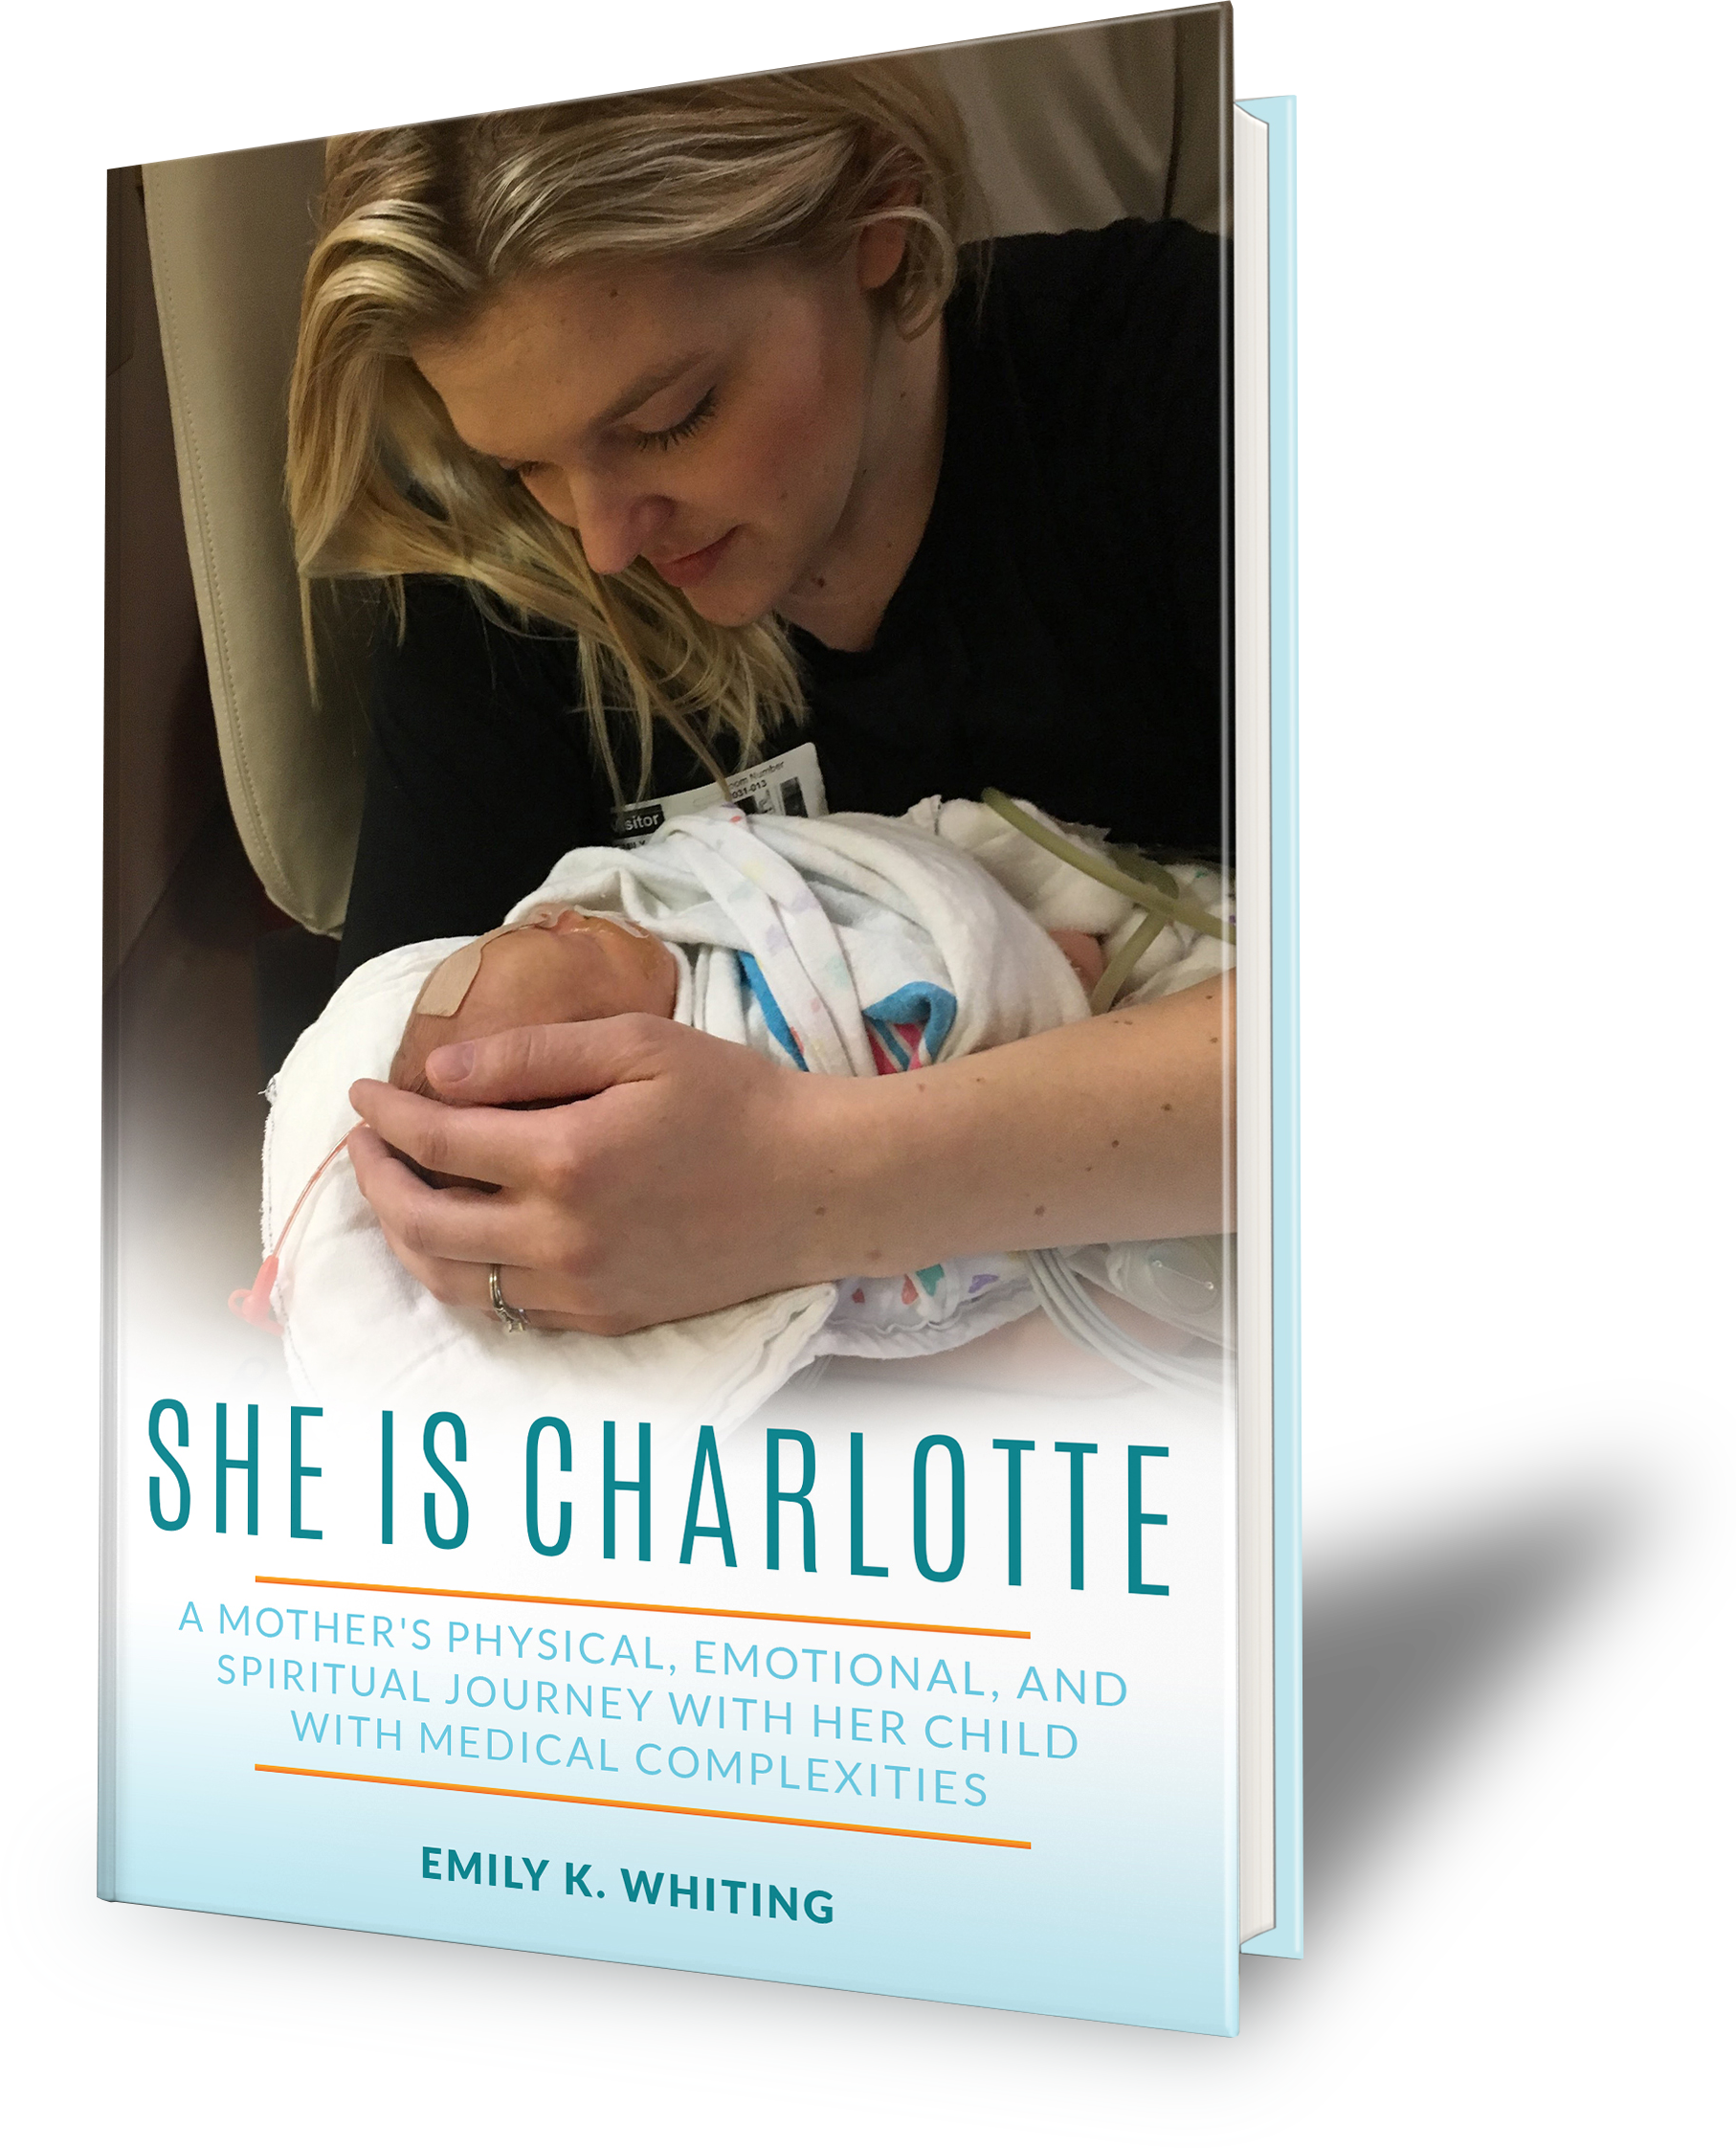 She Is Charlotte book cover with mom and child